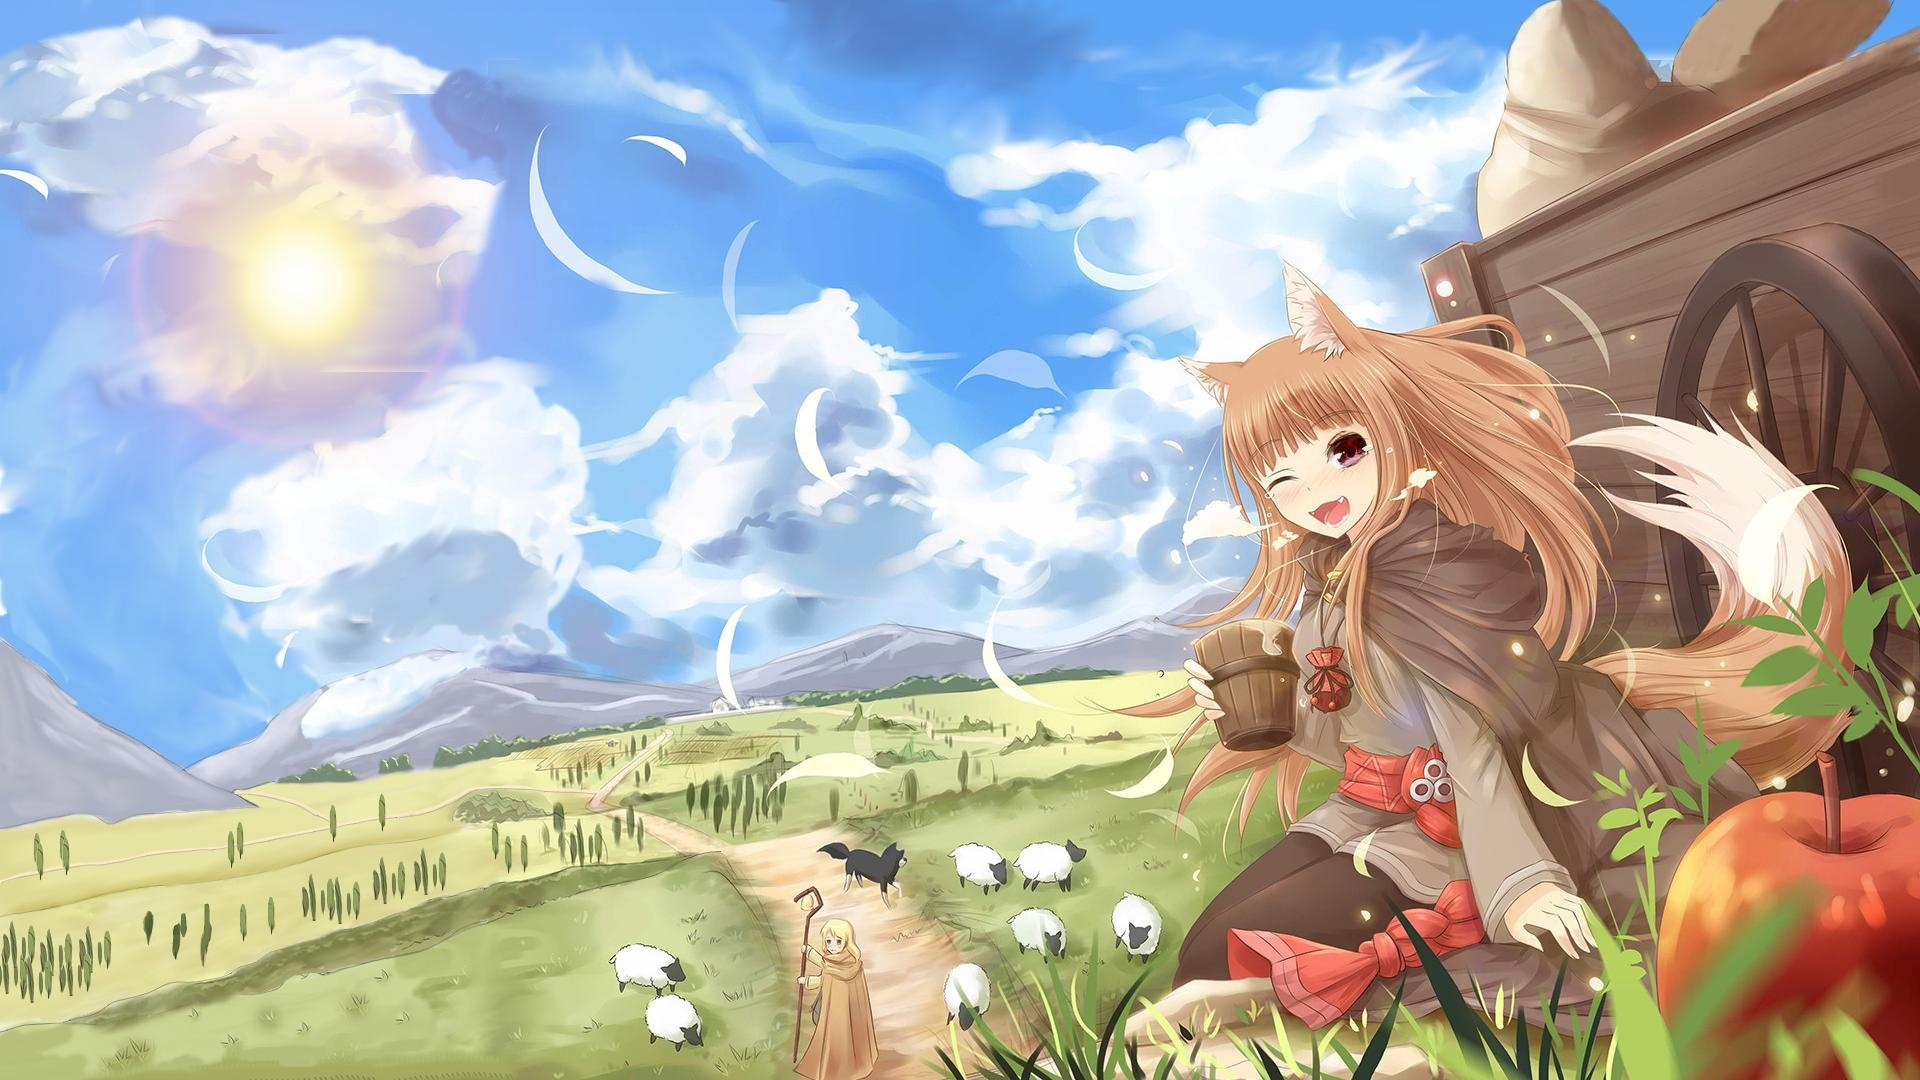 1920x1080 Spice and wolf Spice and wolf Wallpaper (41407329) Fanpop